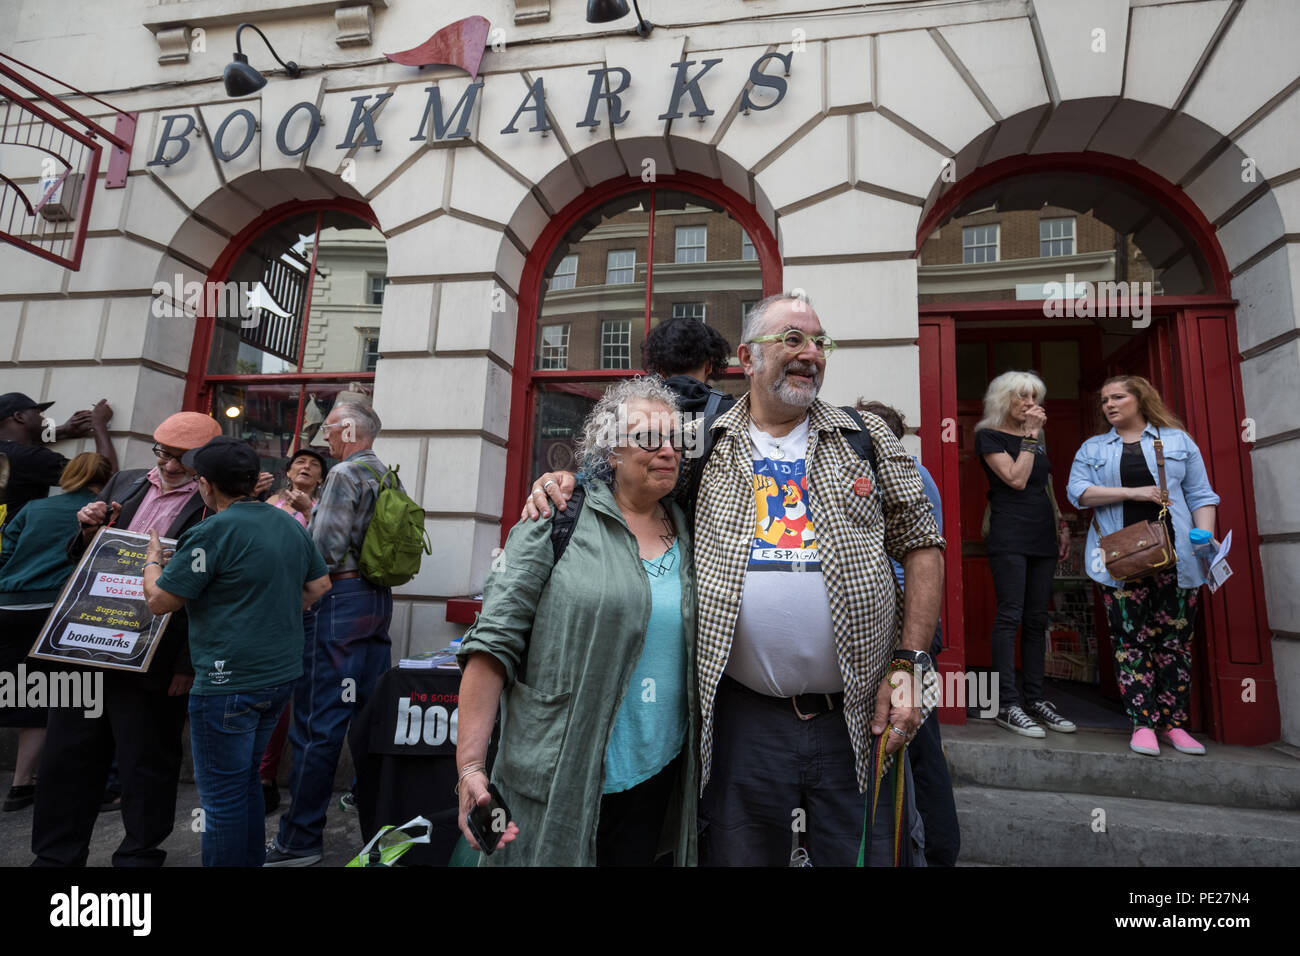 London, UK. 11th August, 2018. Bookmarks in Bloomsbury. Crowds gather at Britain’s largest socialist bookshop in a display of solidarity one week after it was invaded by far-right protesters including three Ukip supporters who had since been suspended from the party pending an investigation. Credit: Guy Corbishley/Alamy Live News Stock Photo